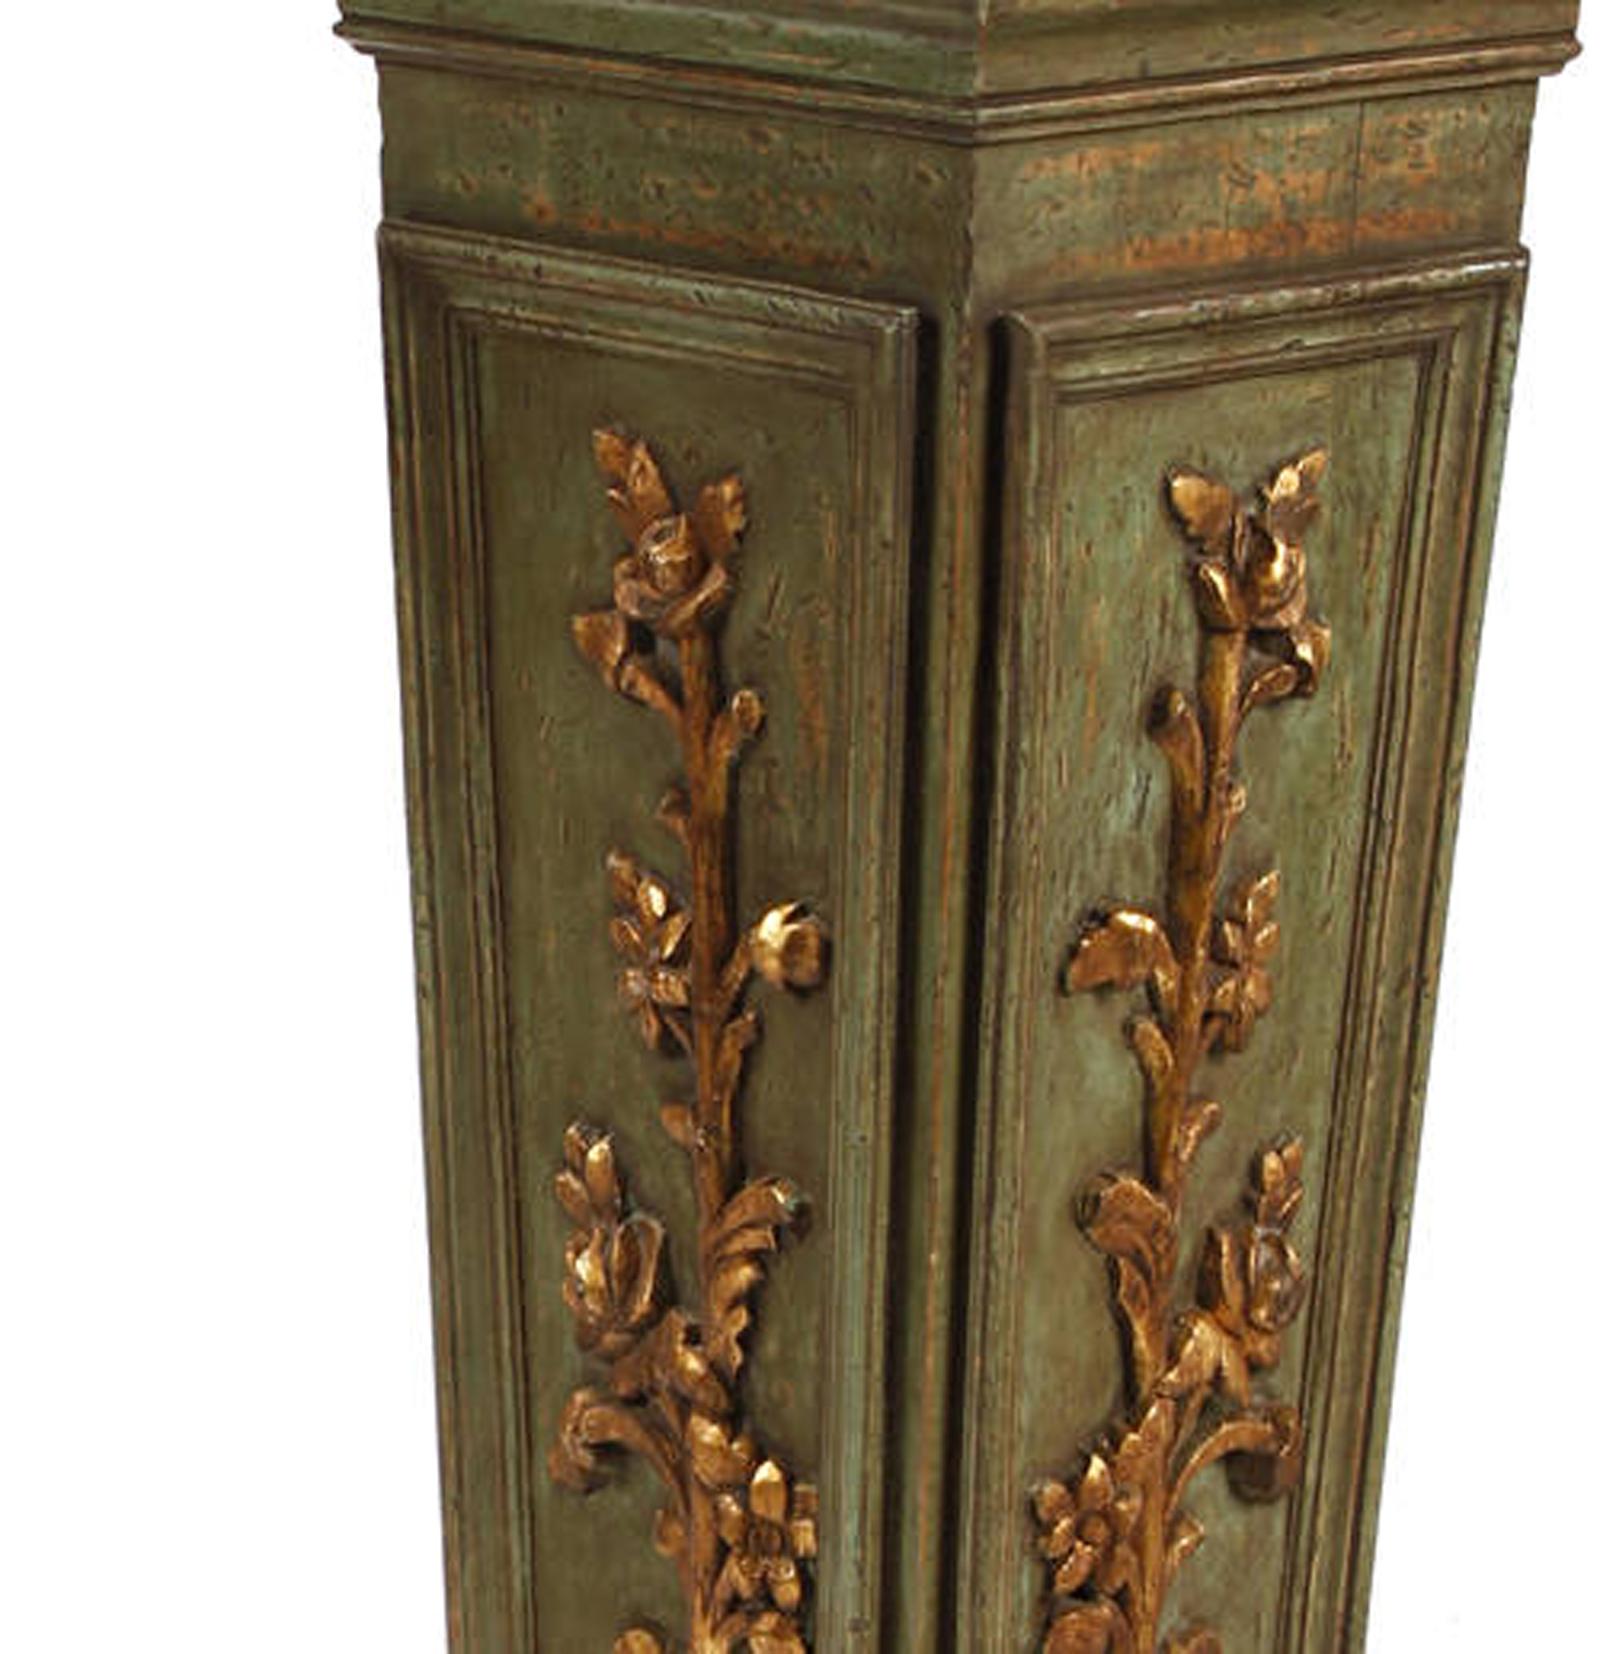 Beautiful pair of Italian neoclassical style parcel gilt and green decorated wood square pedestals in a parcel gilt foliage motif. Second half of the 20th century.